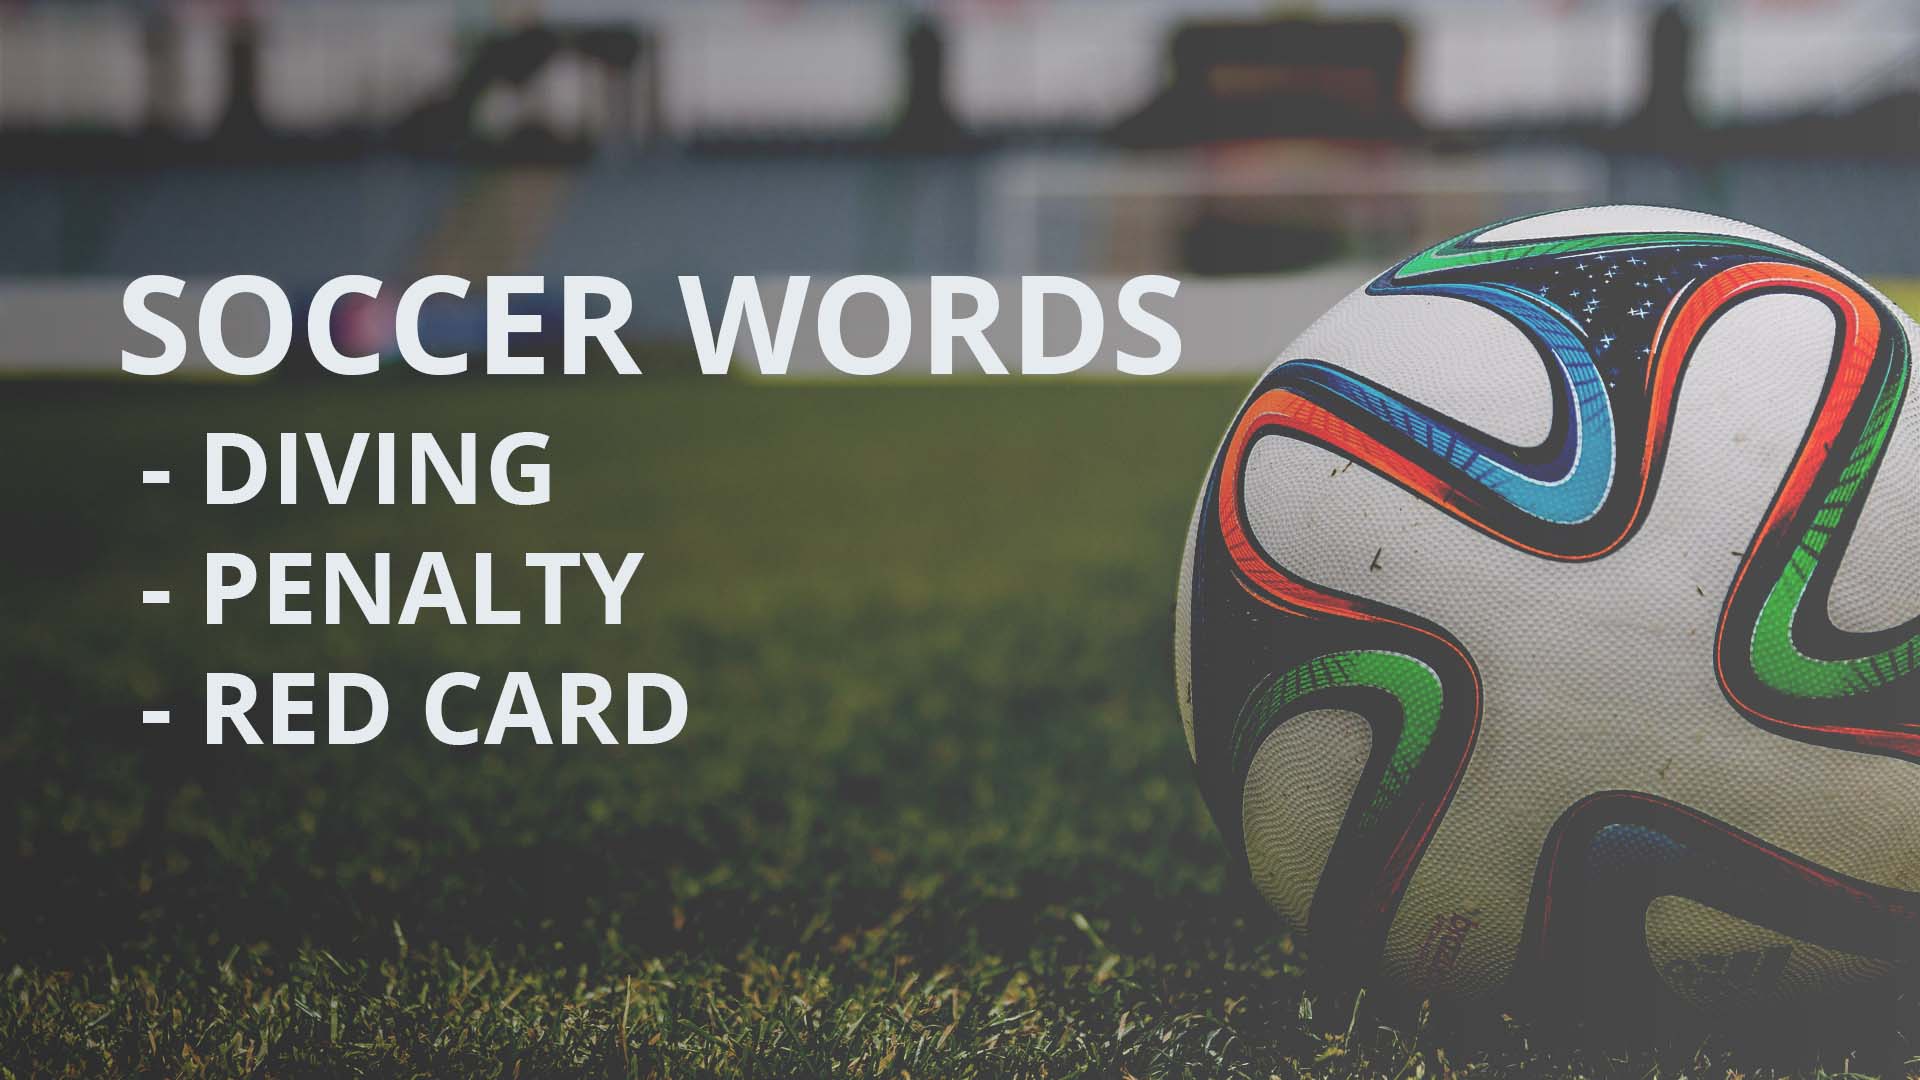 Soccer Words in Chinese: Diving, Penalty, Yellow Card and More!